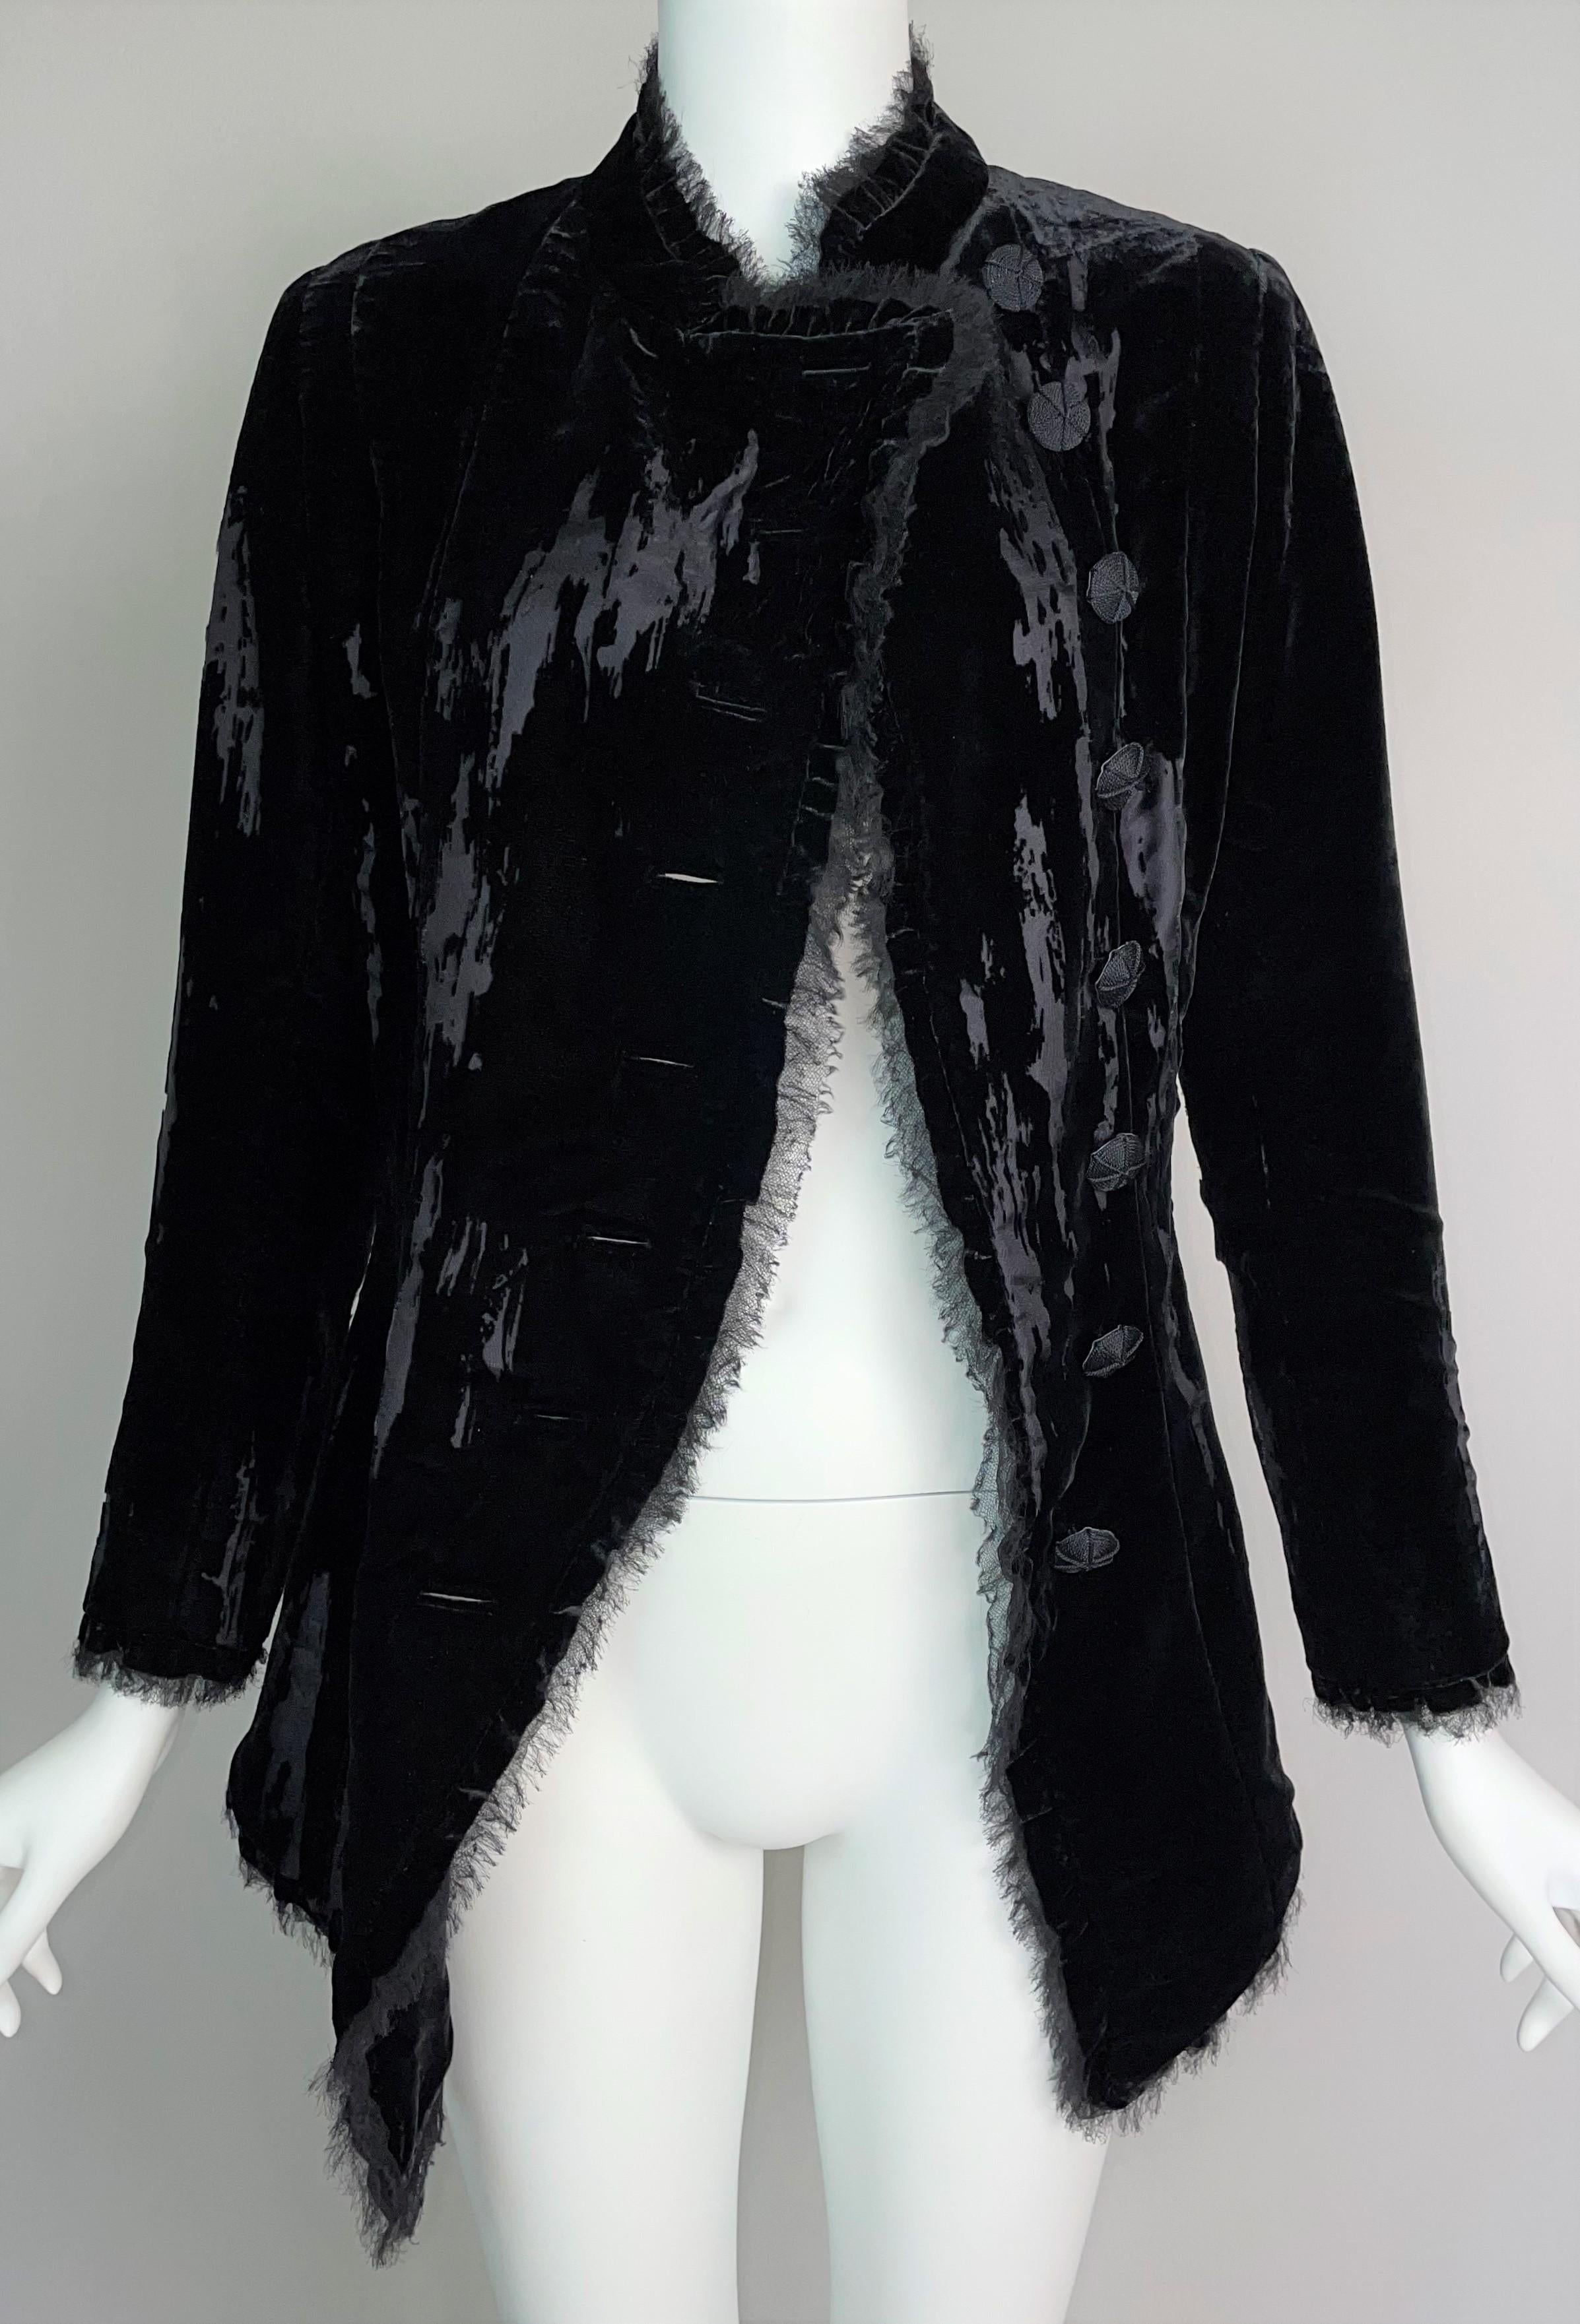 S/S 2005 Christian Dior by John Galliano Haute Couture Black Velvet Jacket In Excellent Condition In Yukon, OK